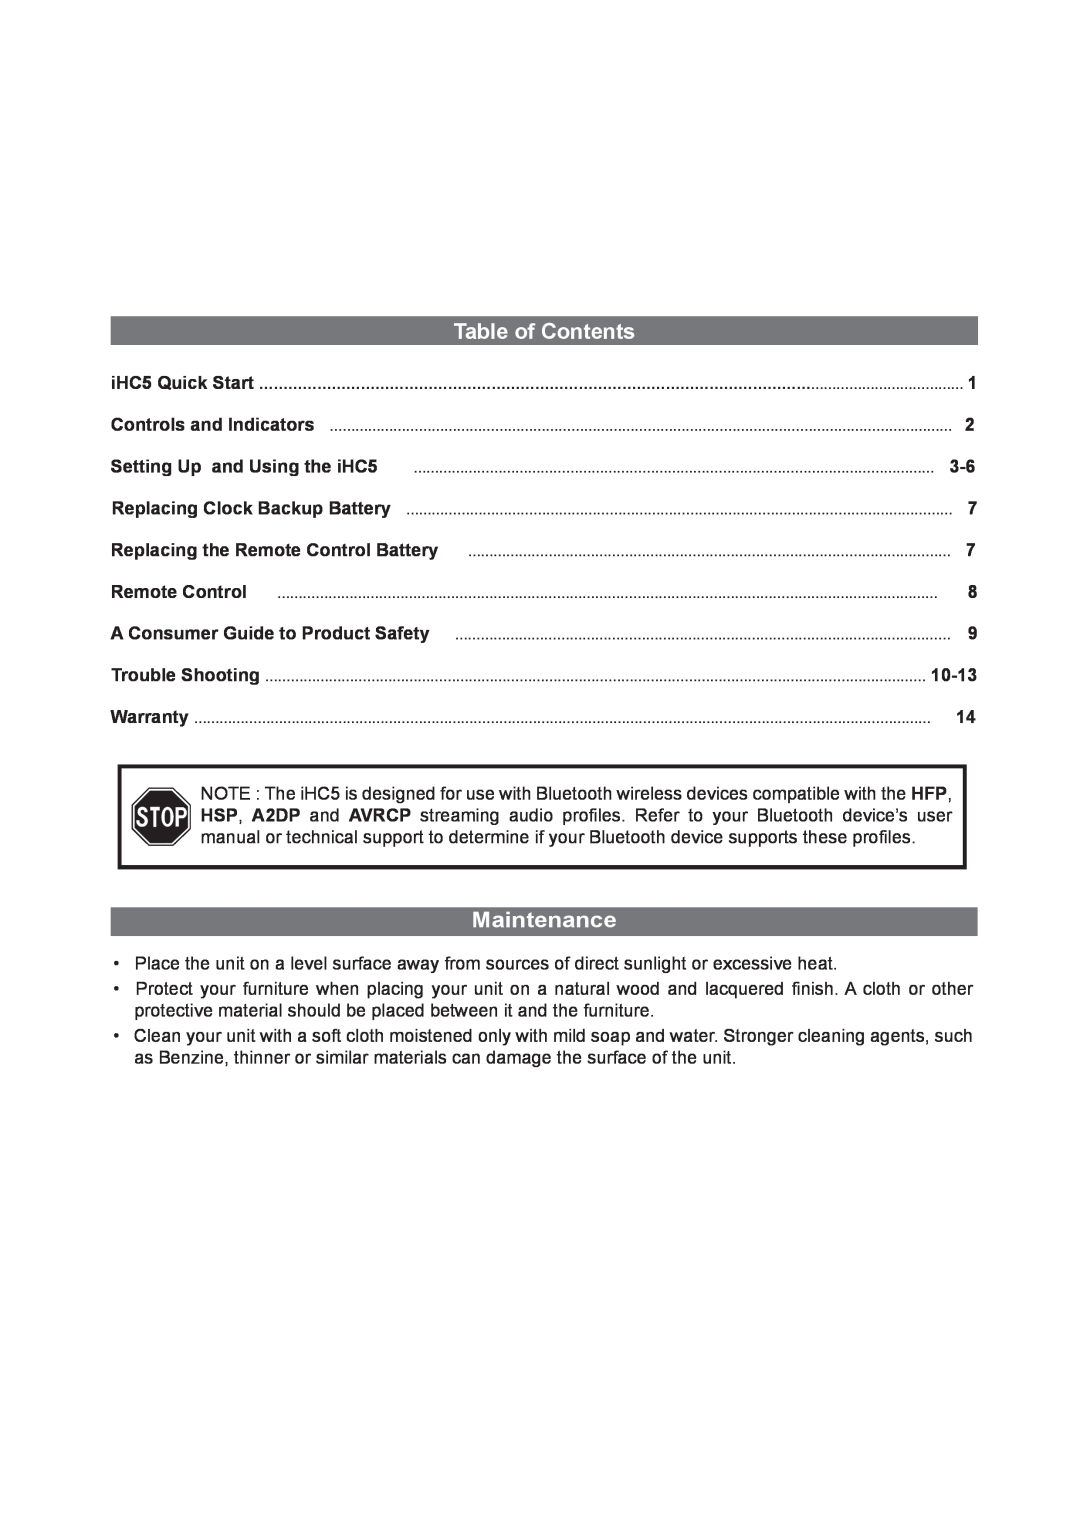 iHome iHC5 manual Table of Contents, Maintenance 